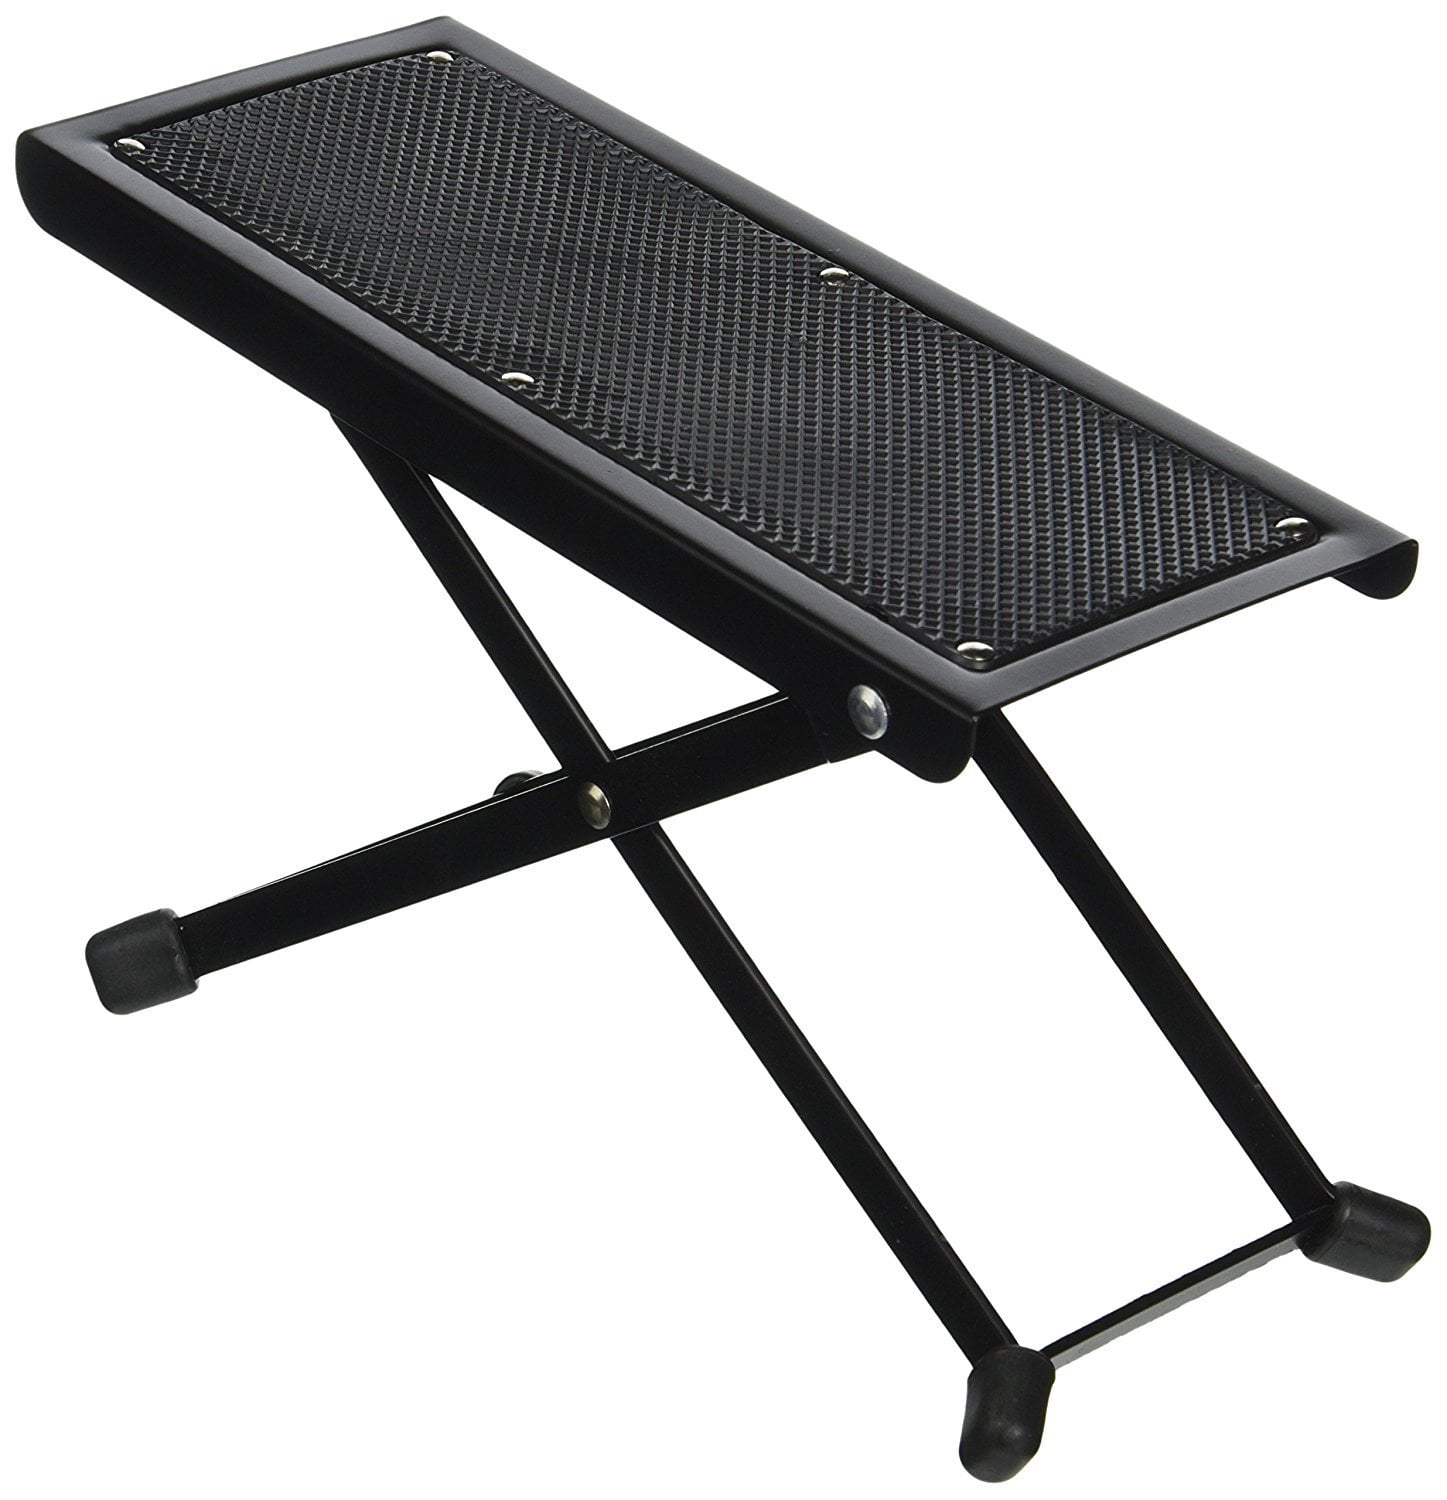 Top Stage Pro Model Guitar Foot Stool/Foot Rest Guitarist 1 pack 